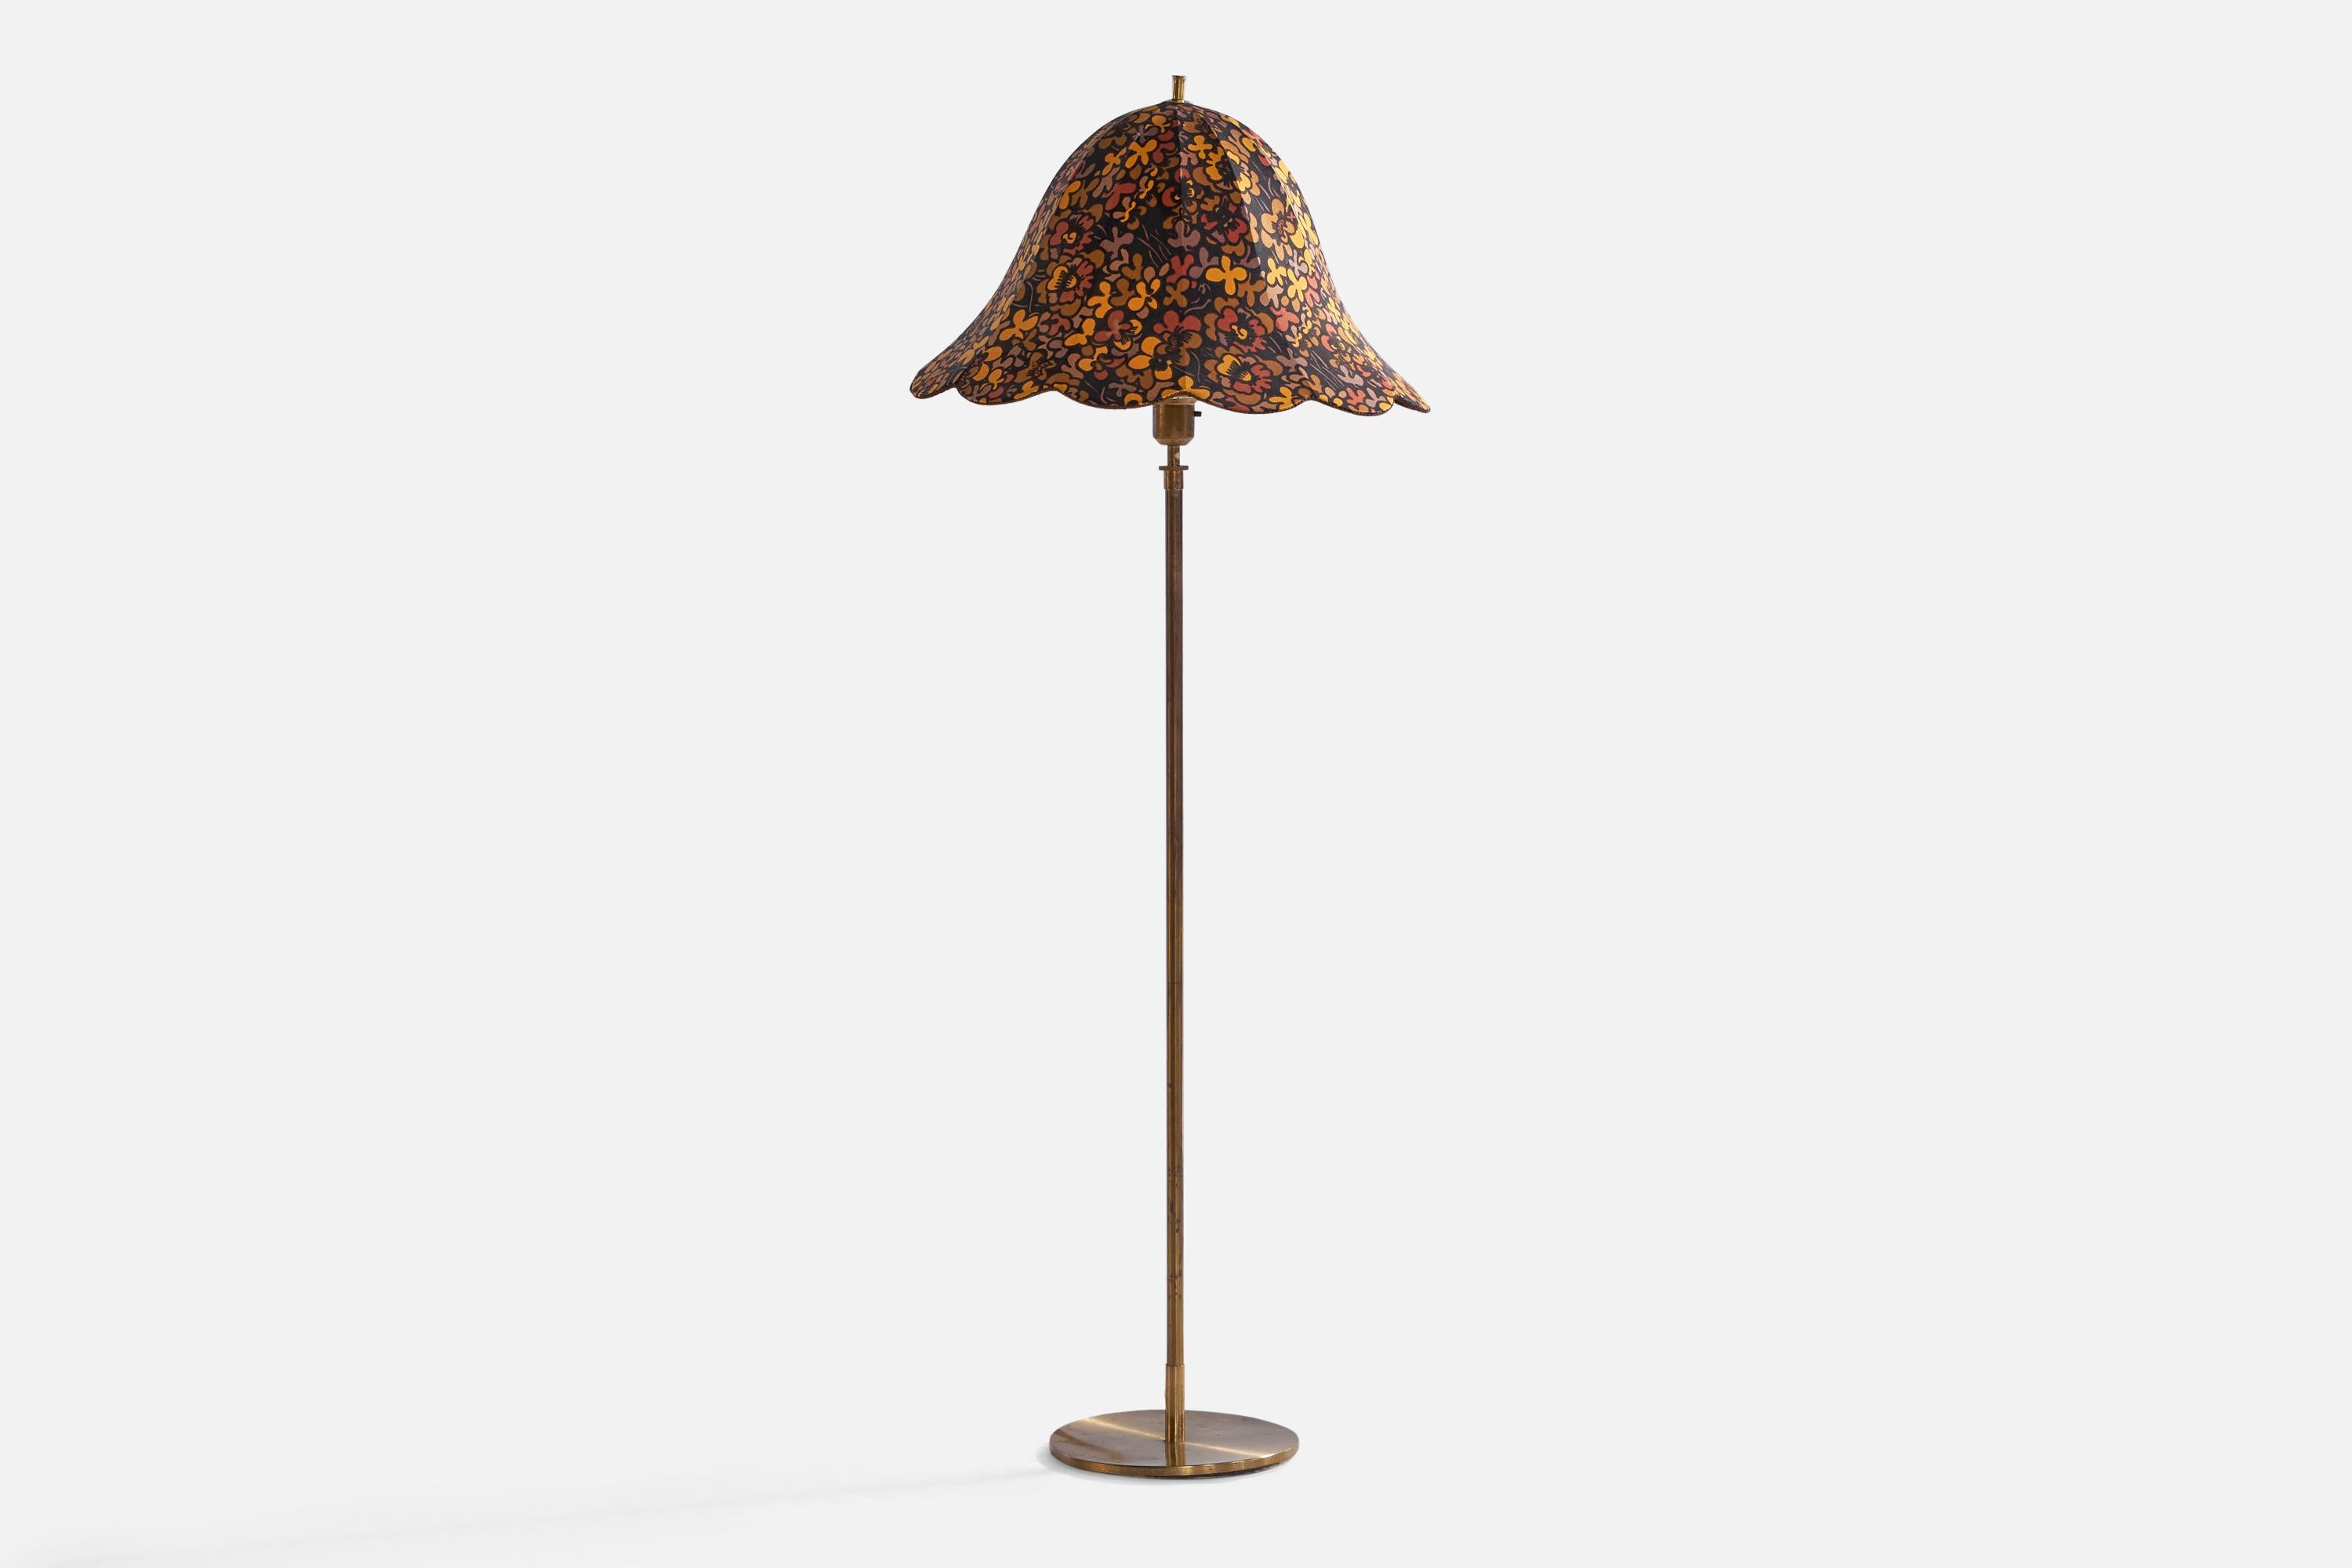 A brass and floral-printed fabric floor lamp designed and produced in Sweden, c. 1960s.

Overall Dimensions (inches): 55.6” H x 21” Diameter
Stated dimensions include shade.
Bulb Specifications: E-26 Bulb
Number of Sockets: 1
All lighting will be